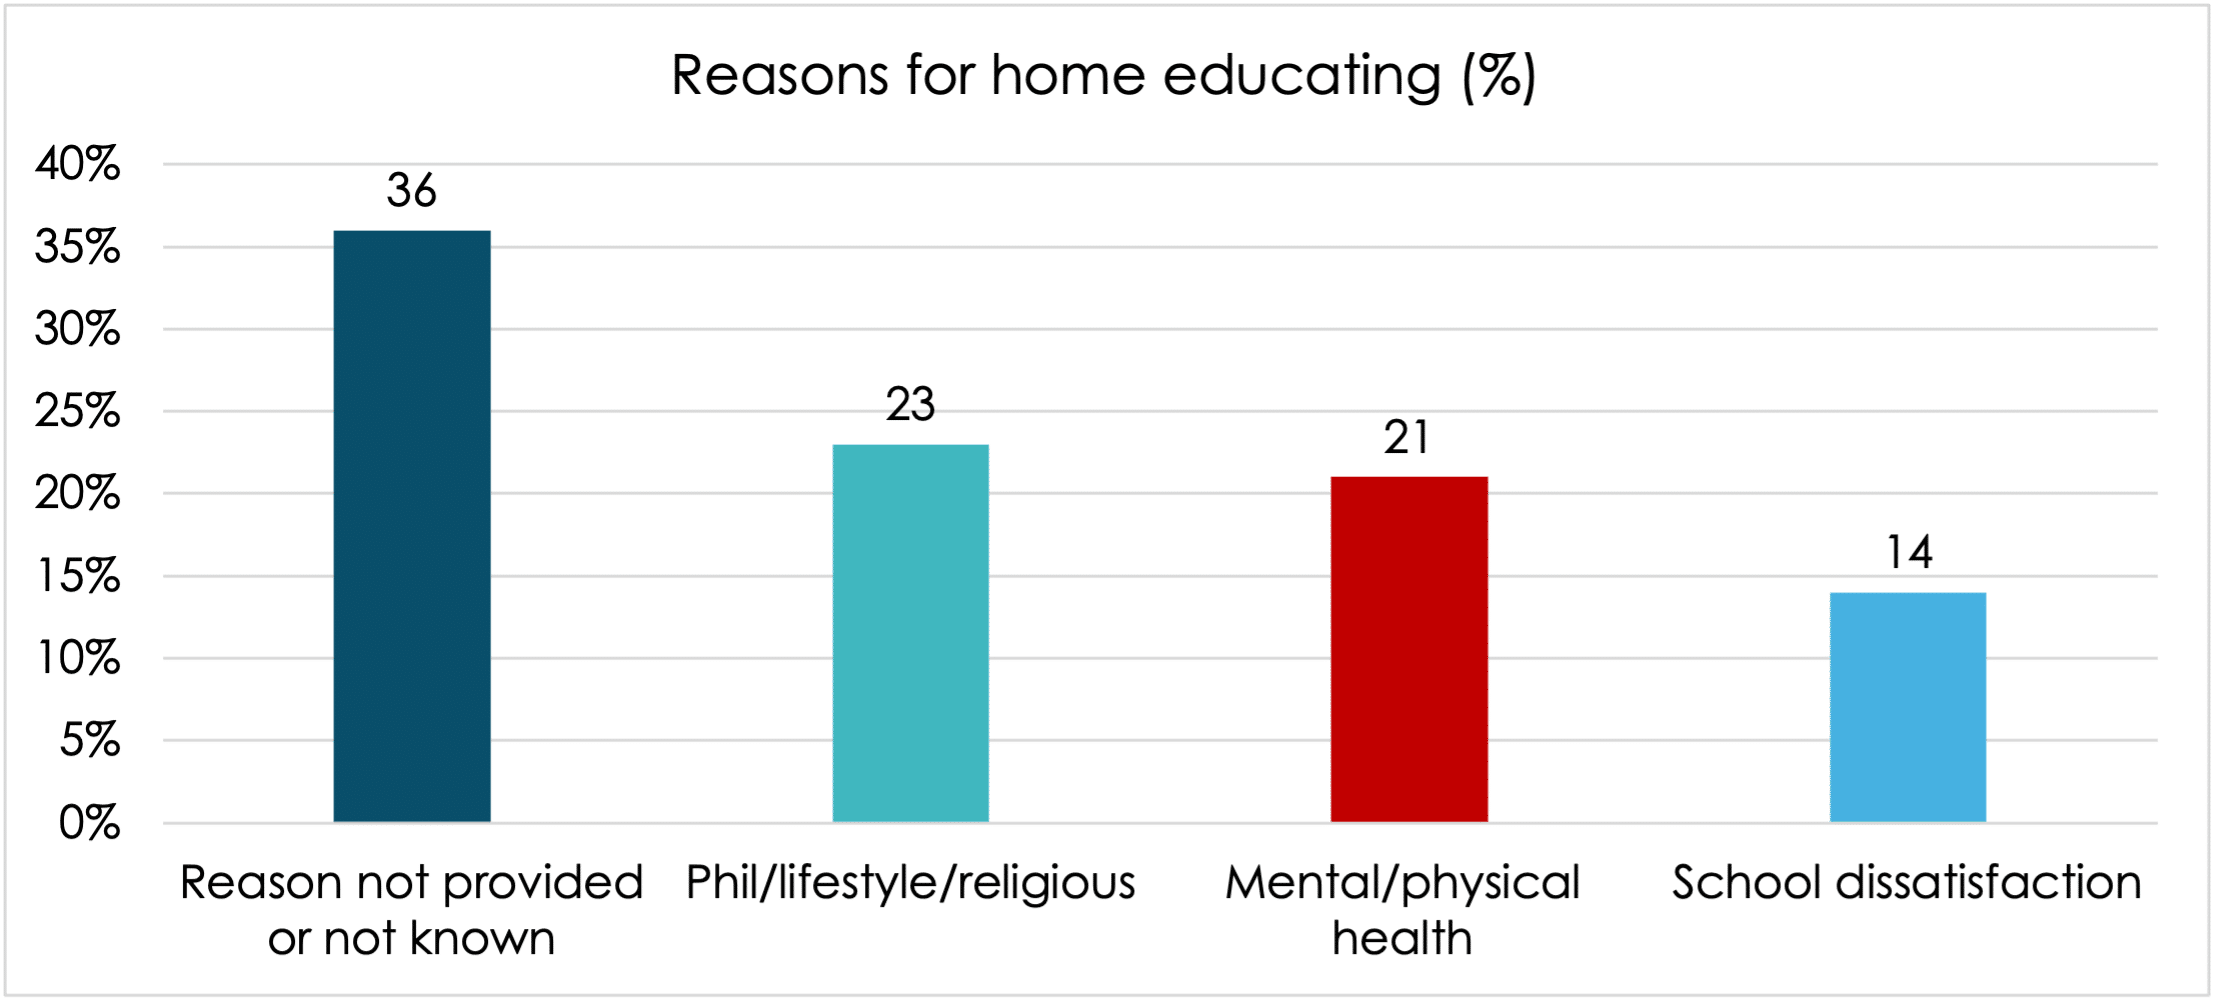 This chart shows the various reasons given for home education (where a reason is known). For those where a reason is known, the most common are reasons of lifestyle/philosophical/religion (23%) (with ‘philosophical’ reasons being the most common of the three), and health (21%) where mental health is more common by some distance than physical health (15% v 6%). A further 14% are outside of school because of dissatisfaction with school provision. 